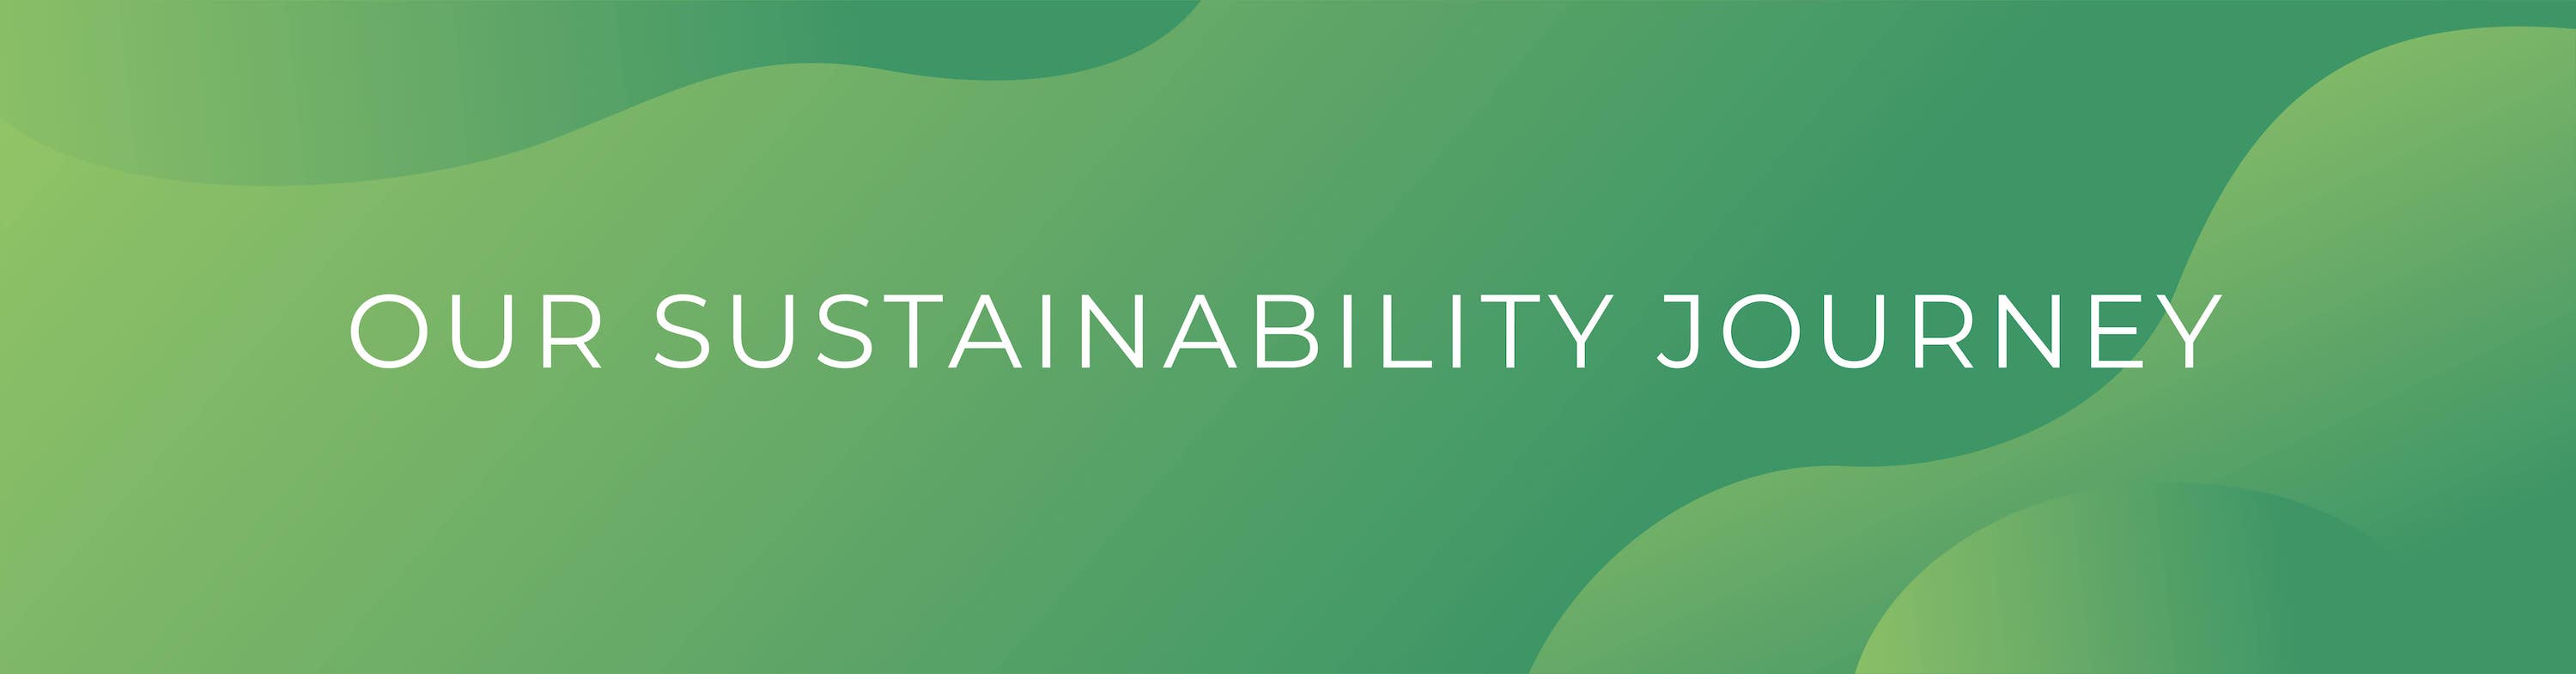 Our_Sustainability_Journey-01-min.jpg